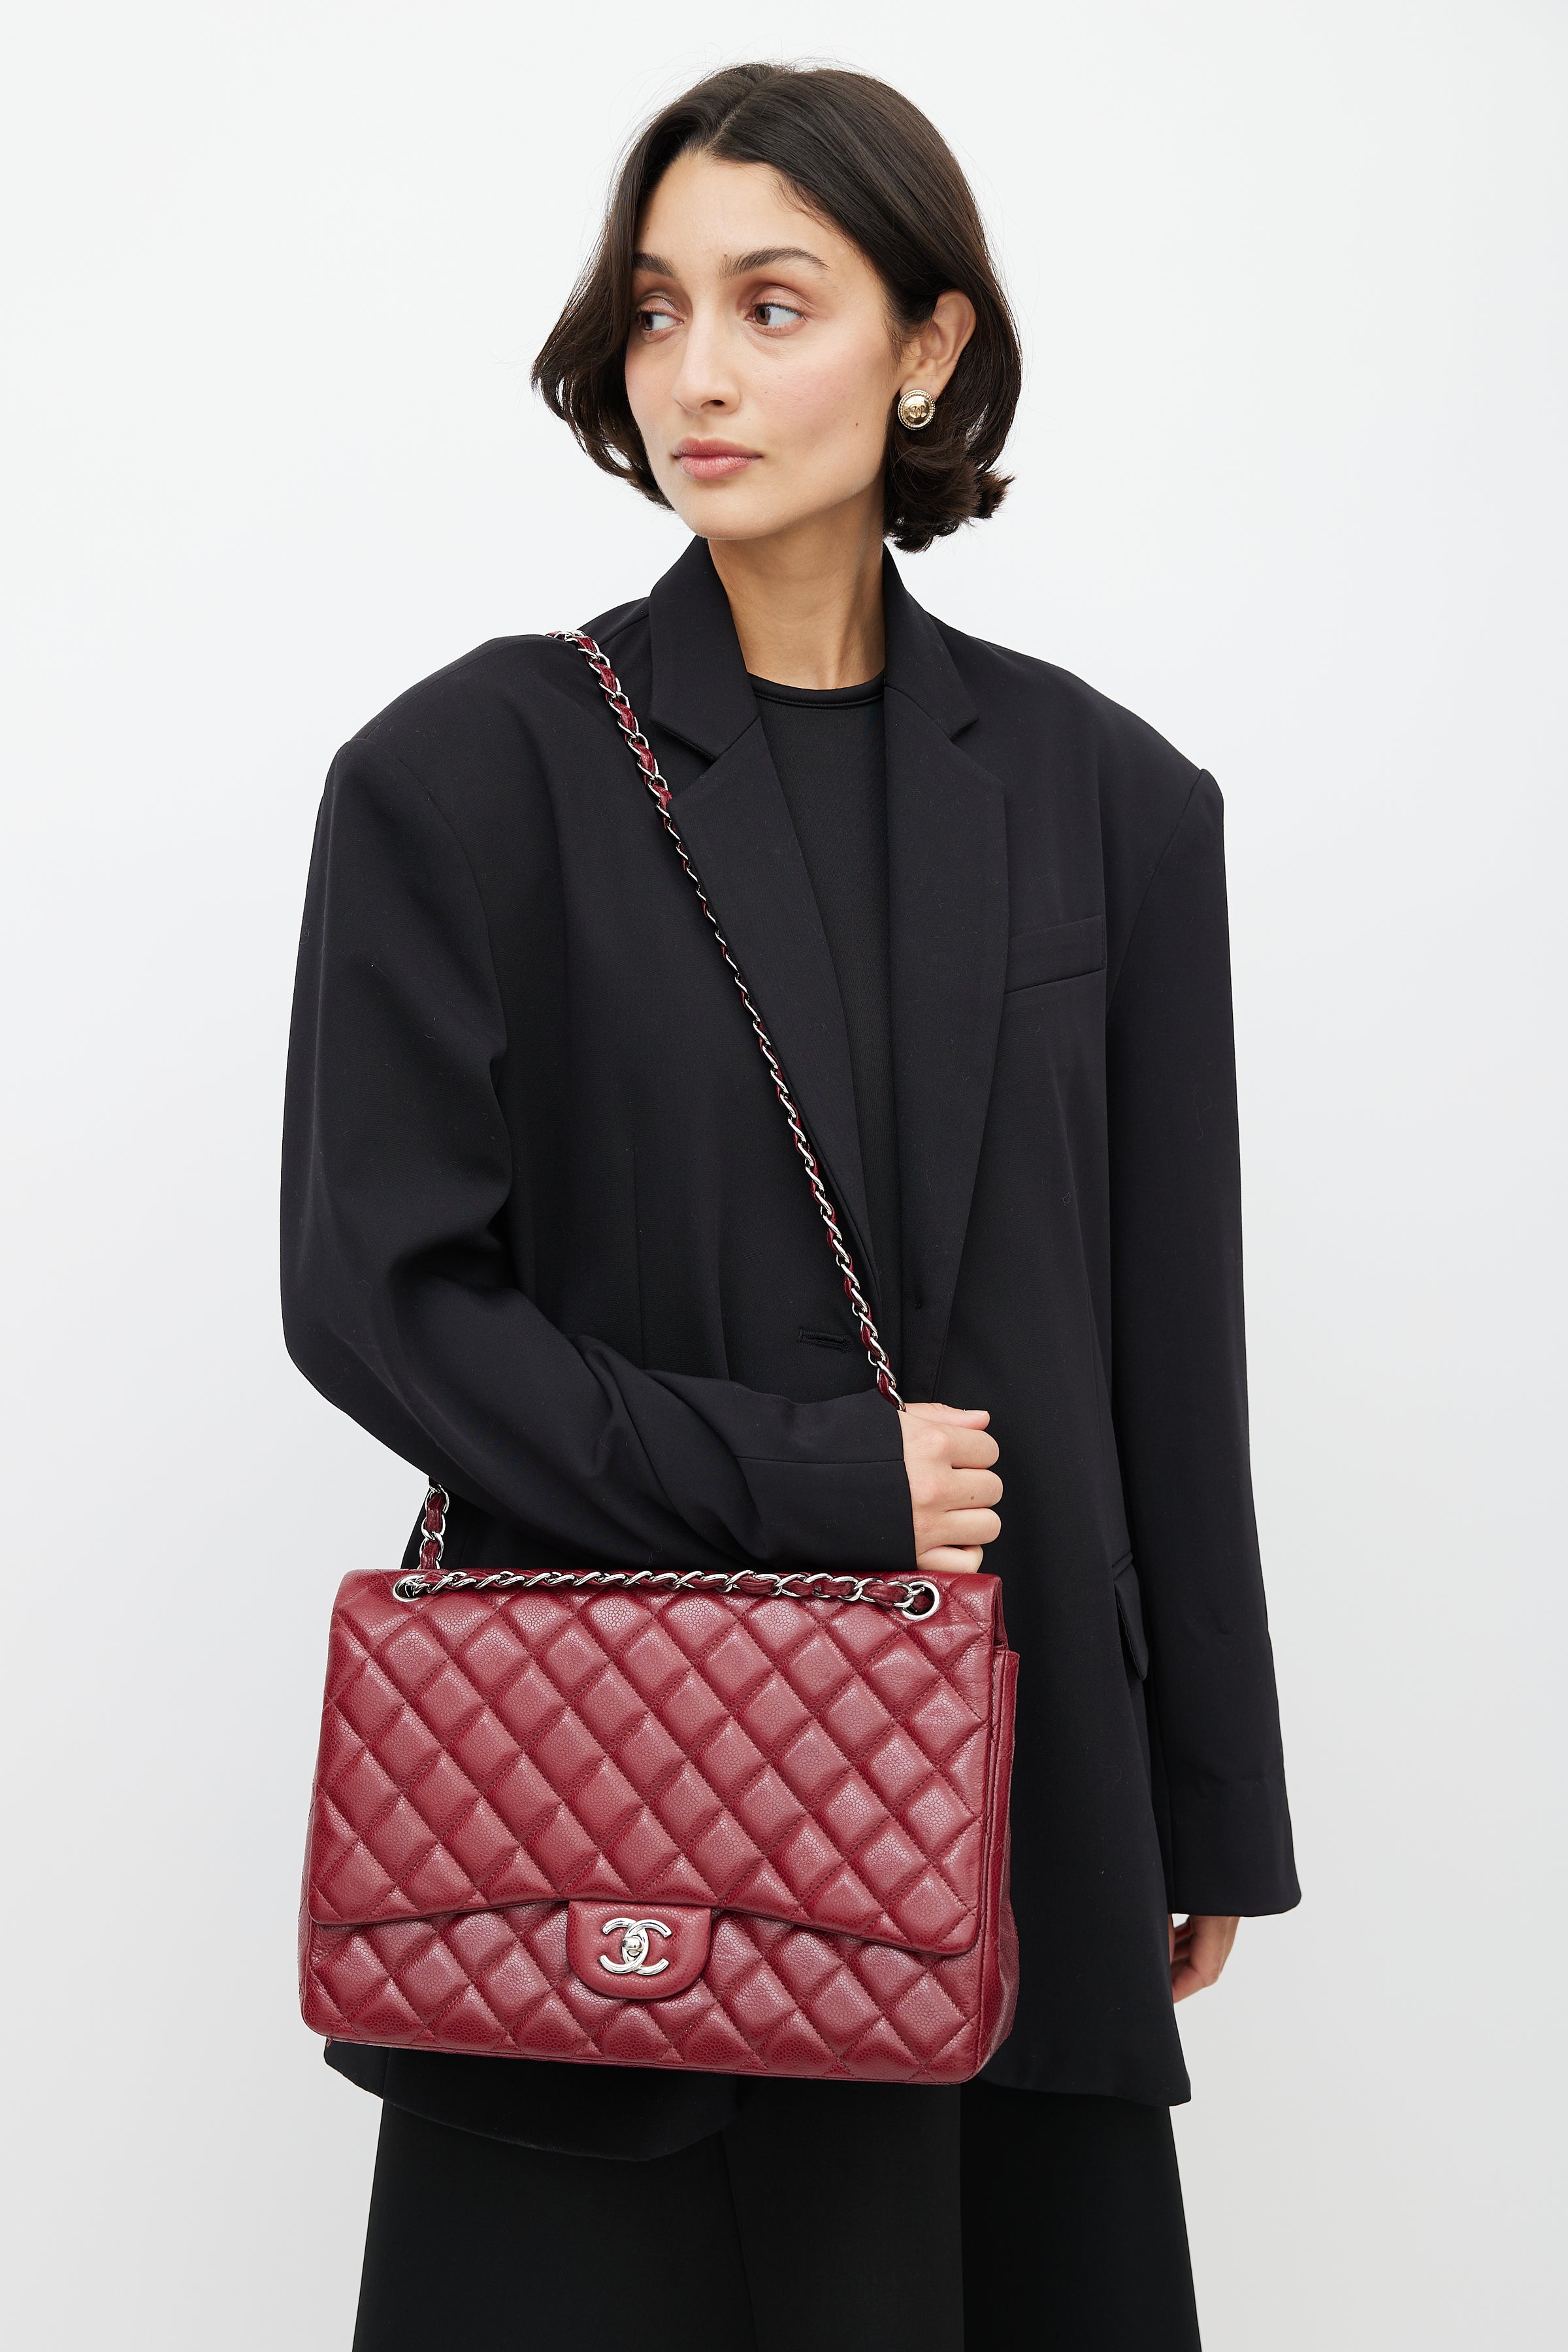 Chanel // 2010 Burgundy Quilted Leather Maxi Flap Bag – VSP Consignment